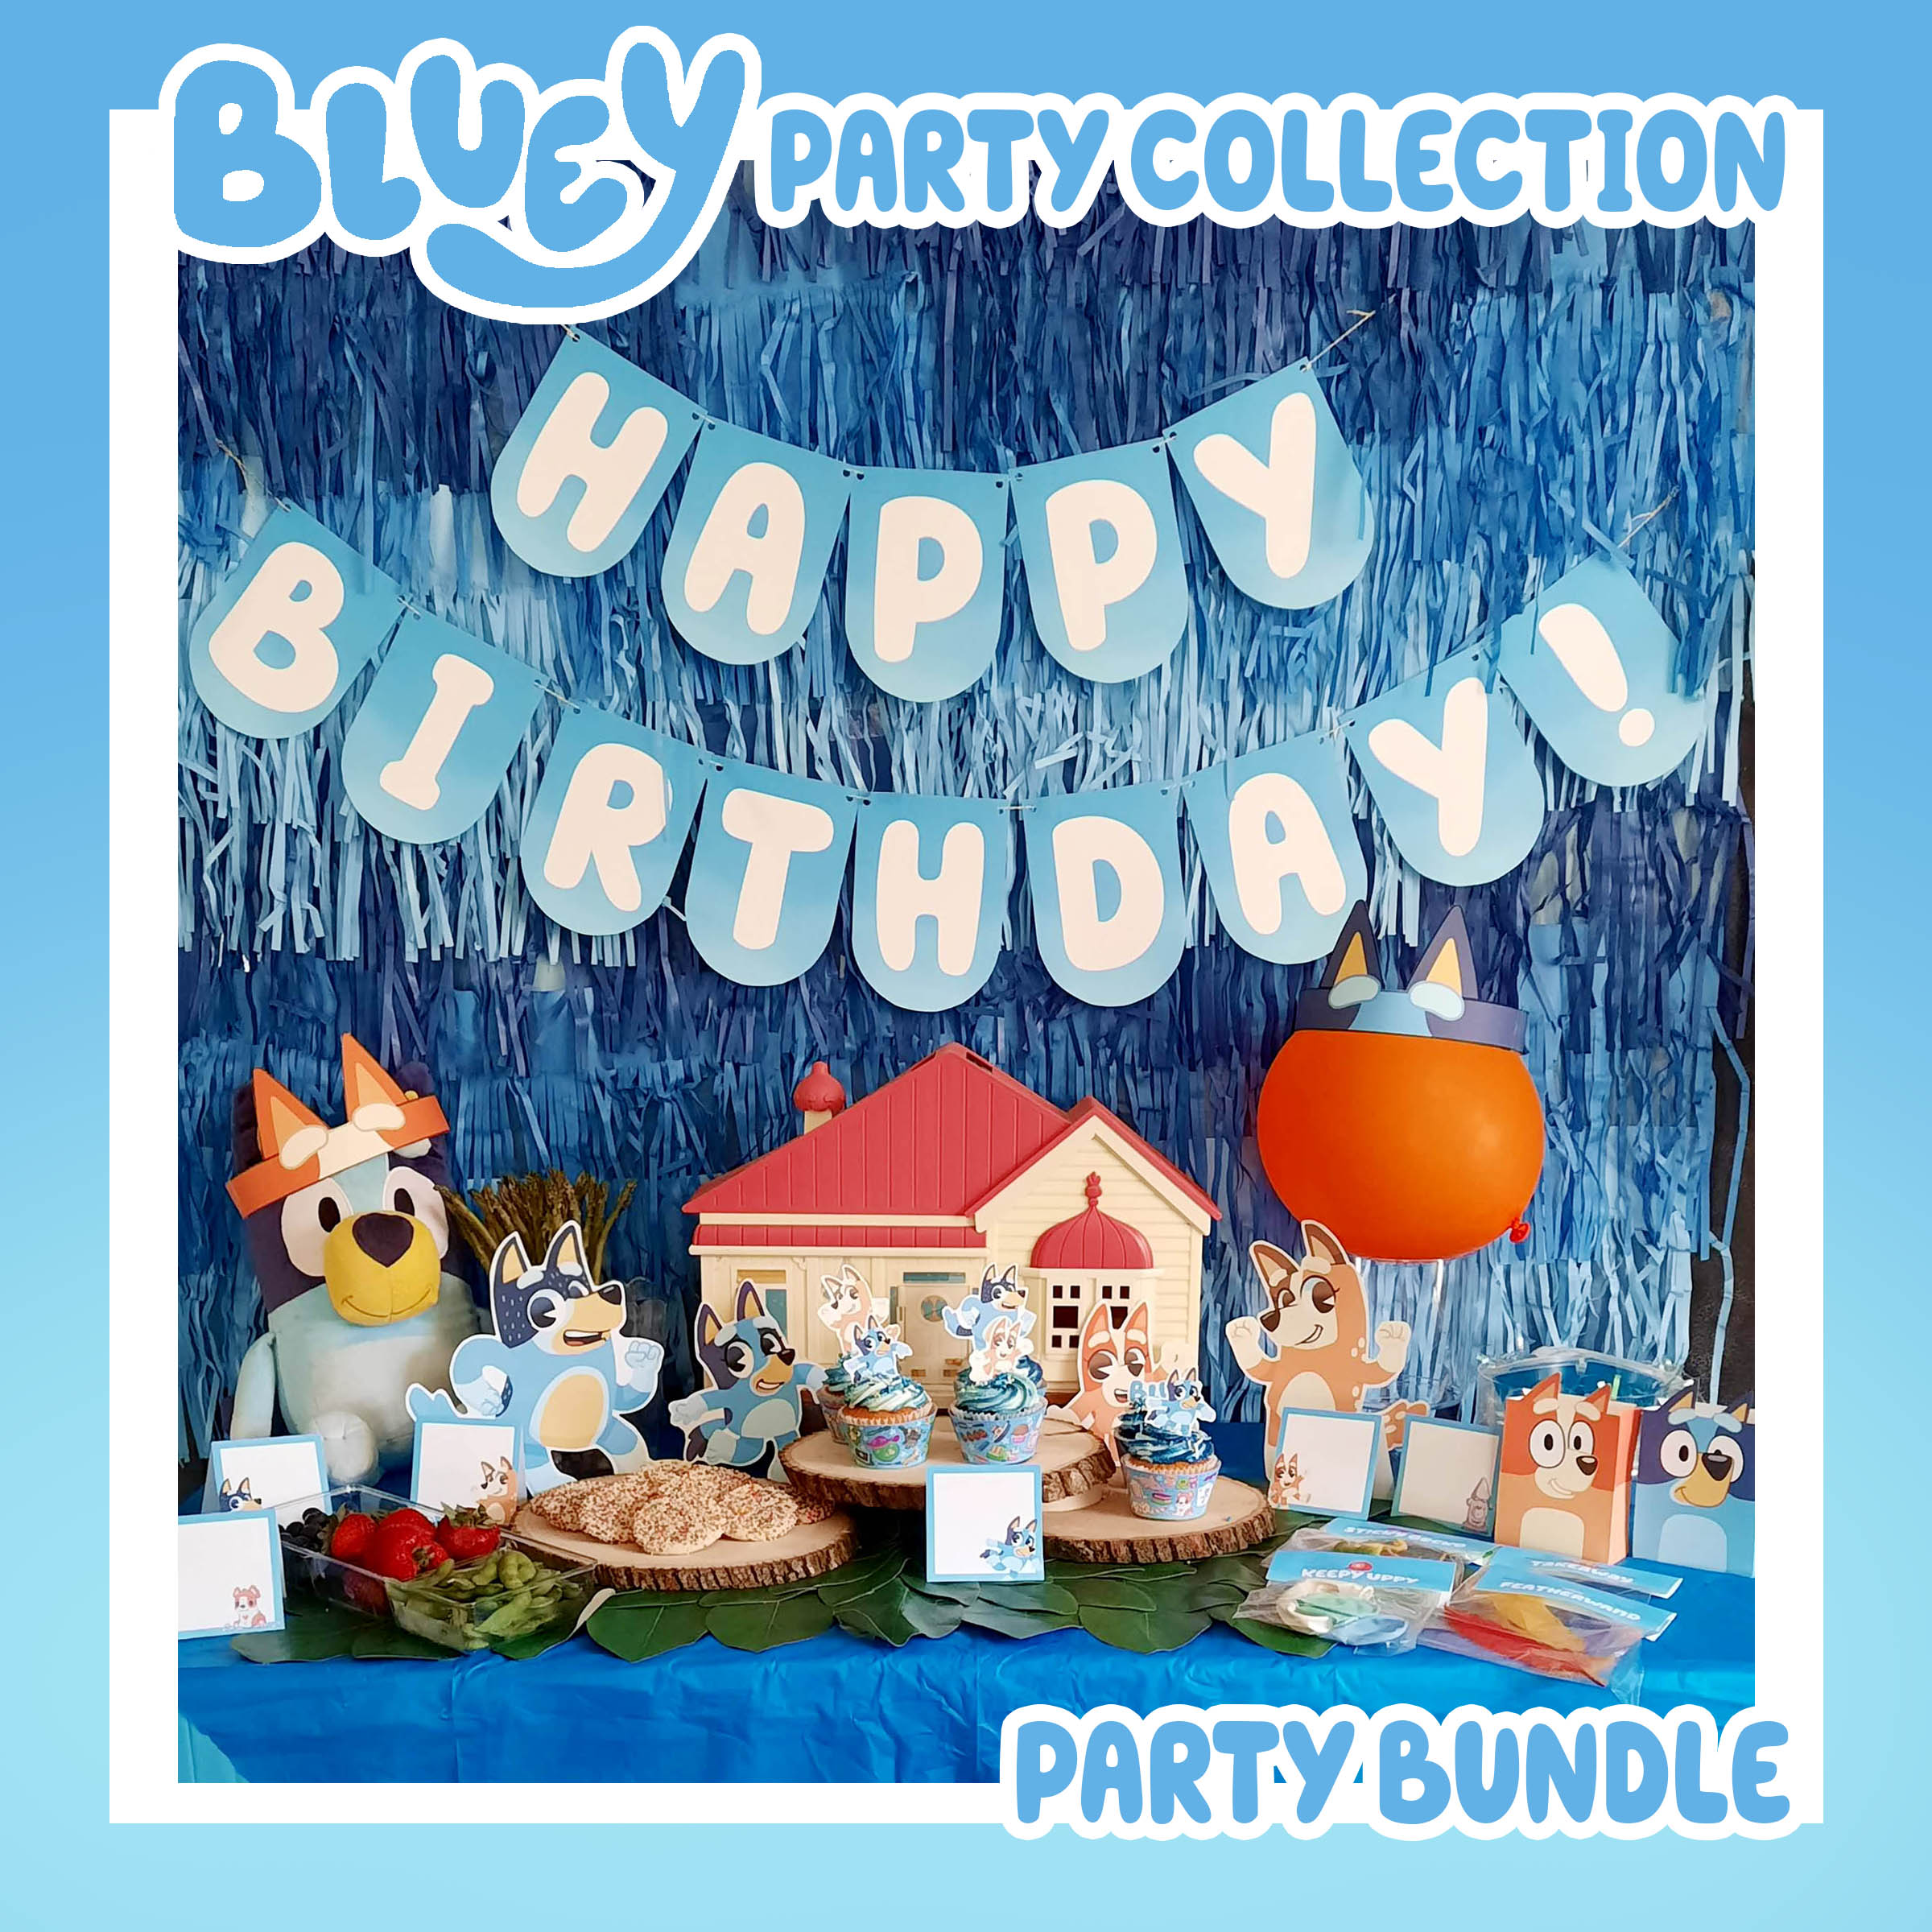 Bluey Birthday Party Supplies Bundle Pack includes Party Paper